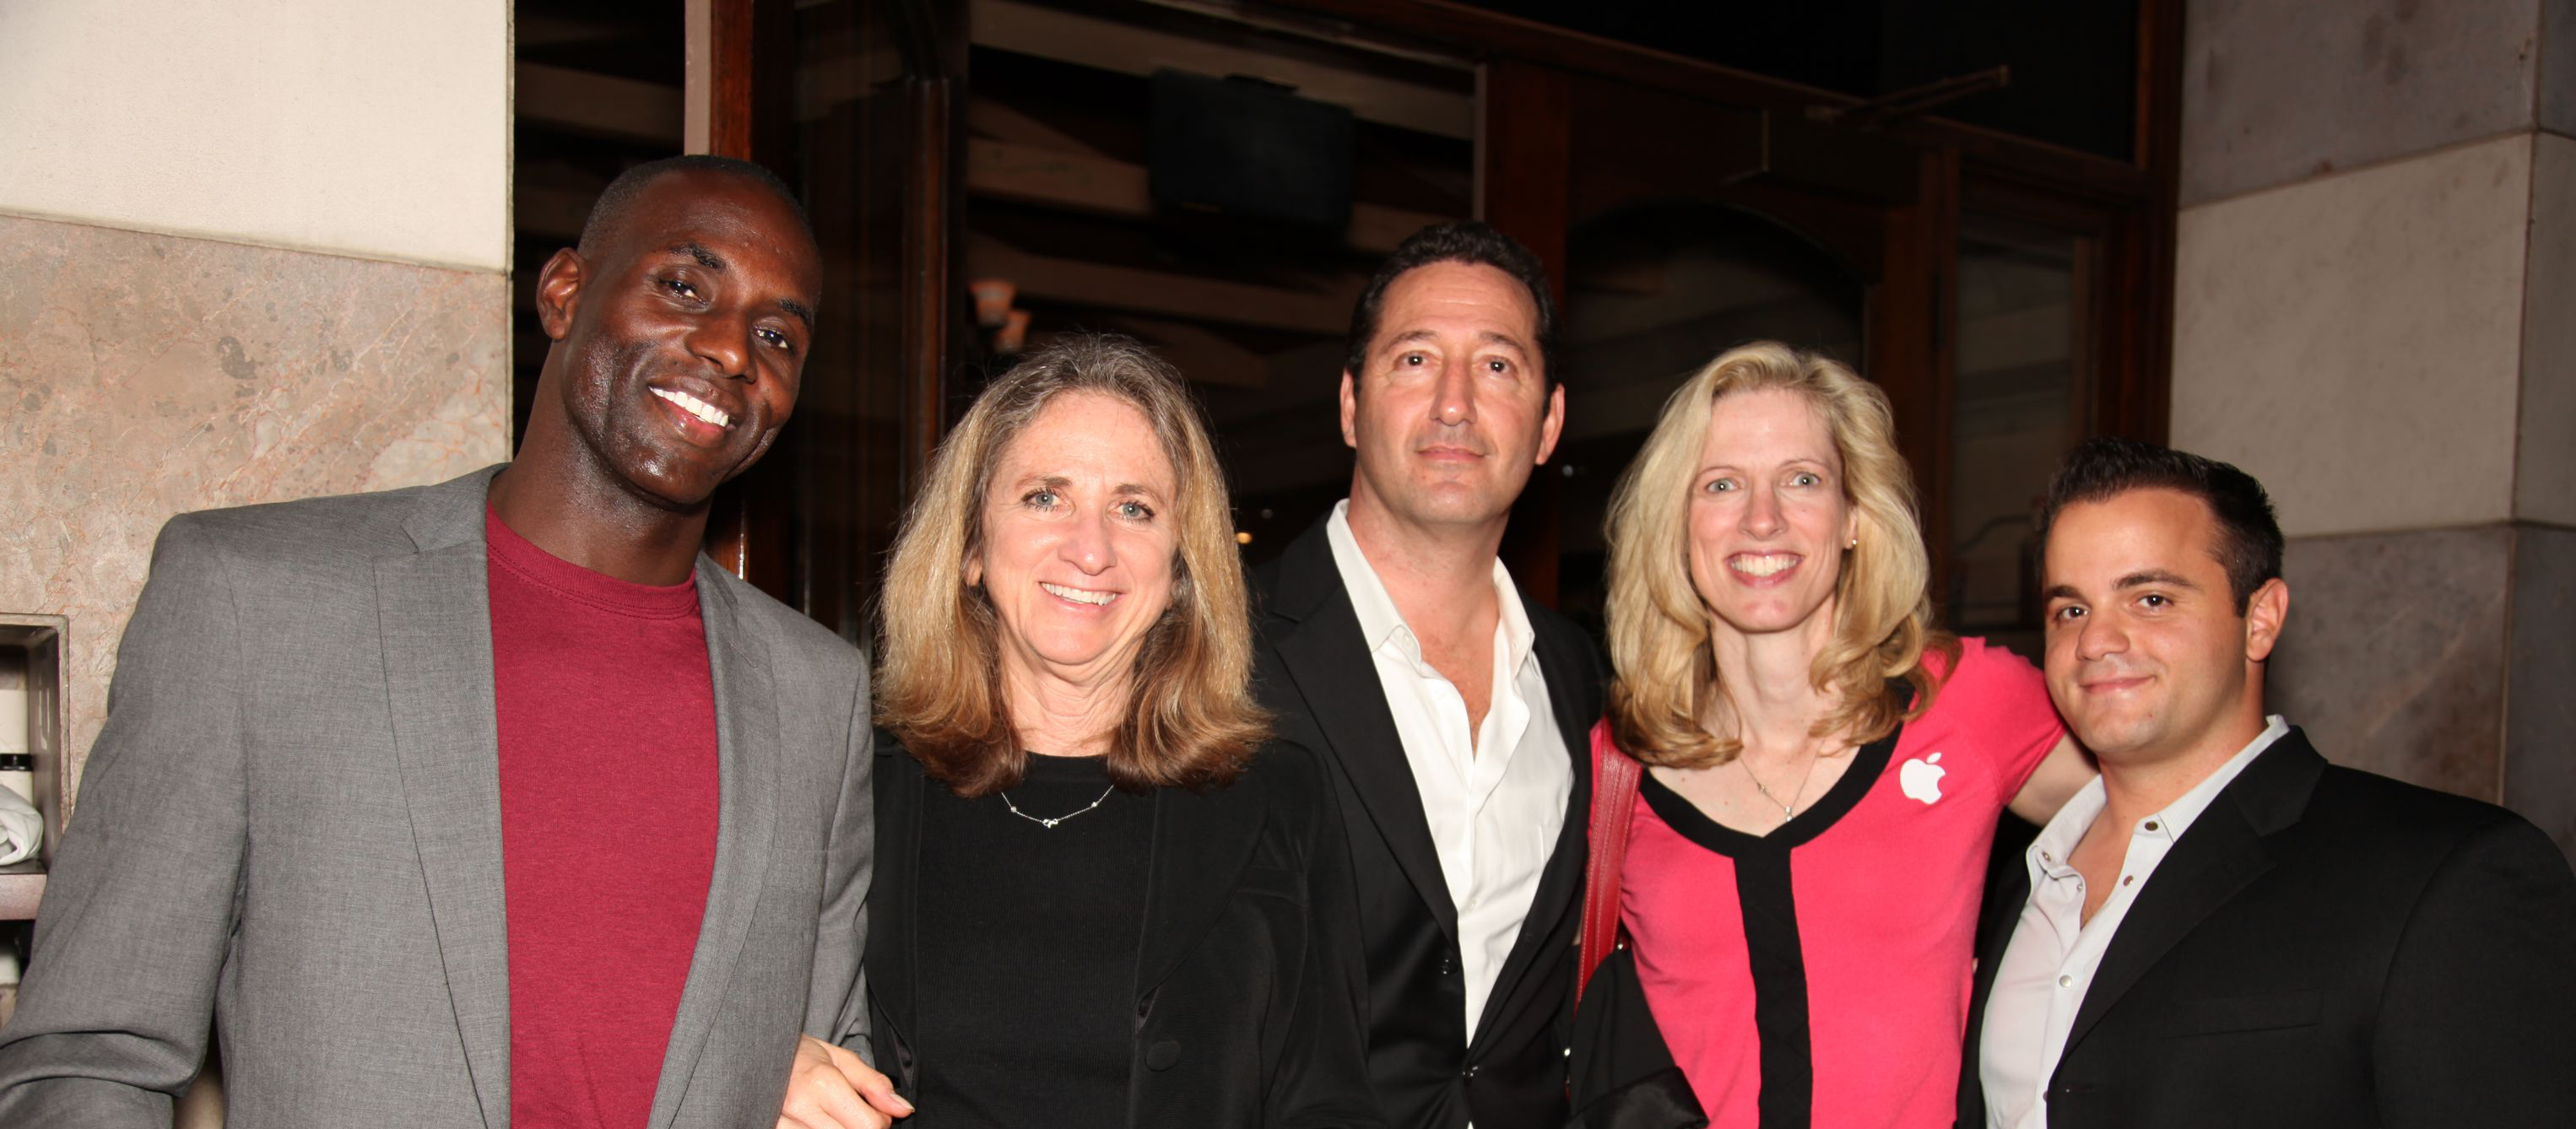 Lanre Idewu, Ellen, Jay Cohen, Mary Patty Smith and Jay Cohen during AFM '09